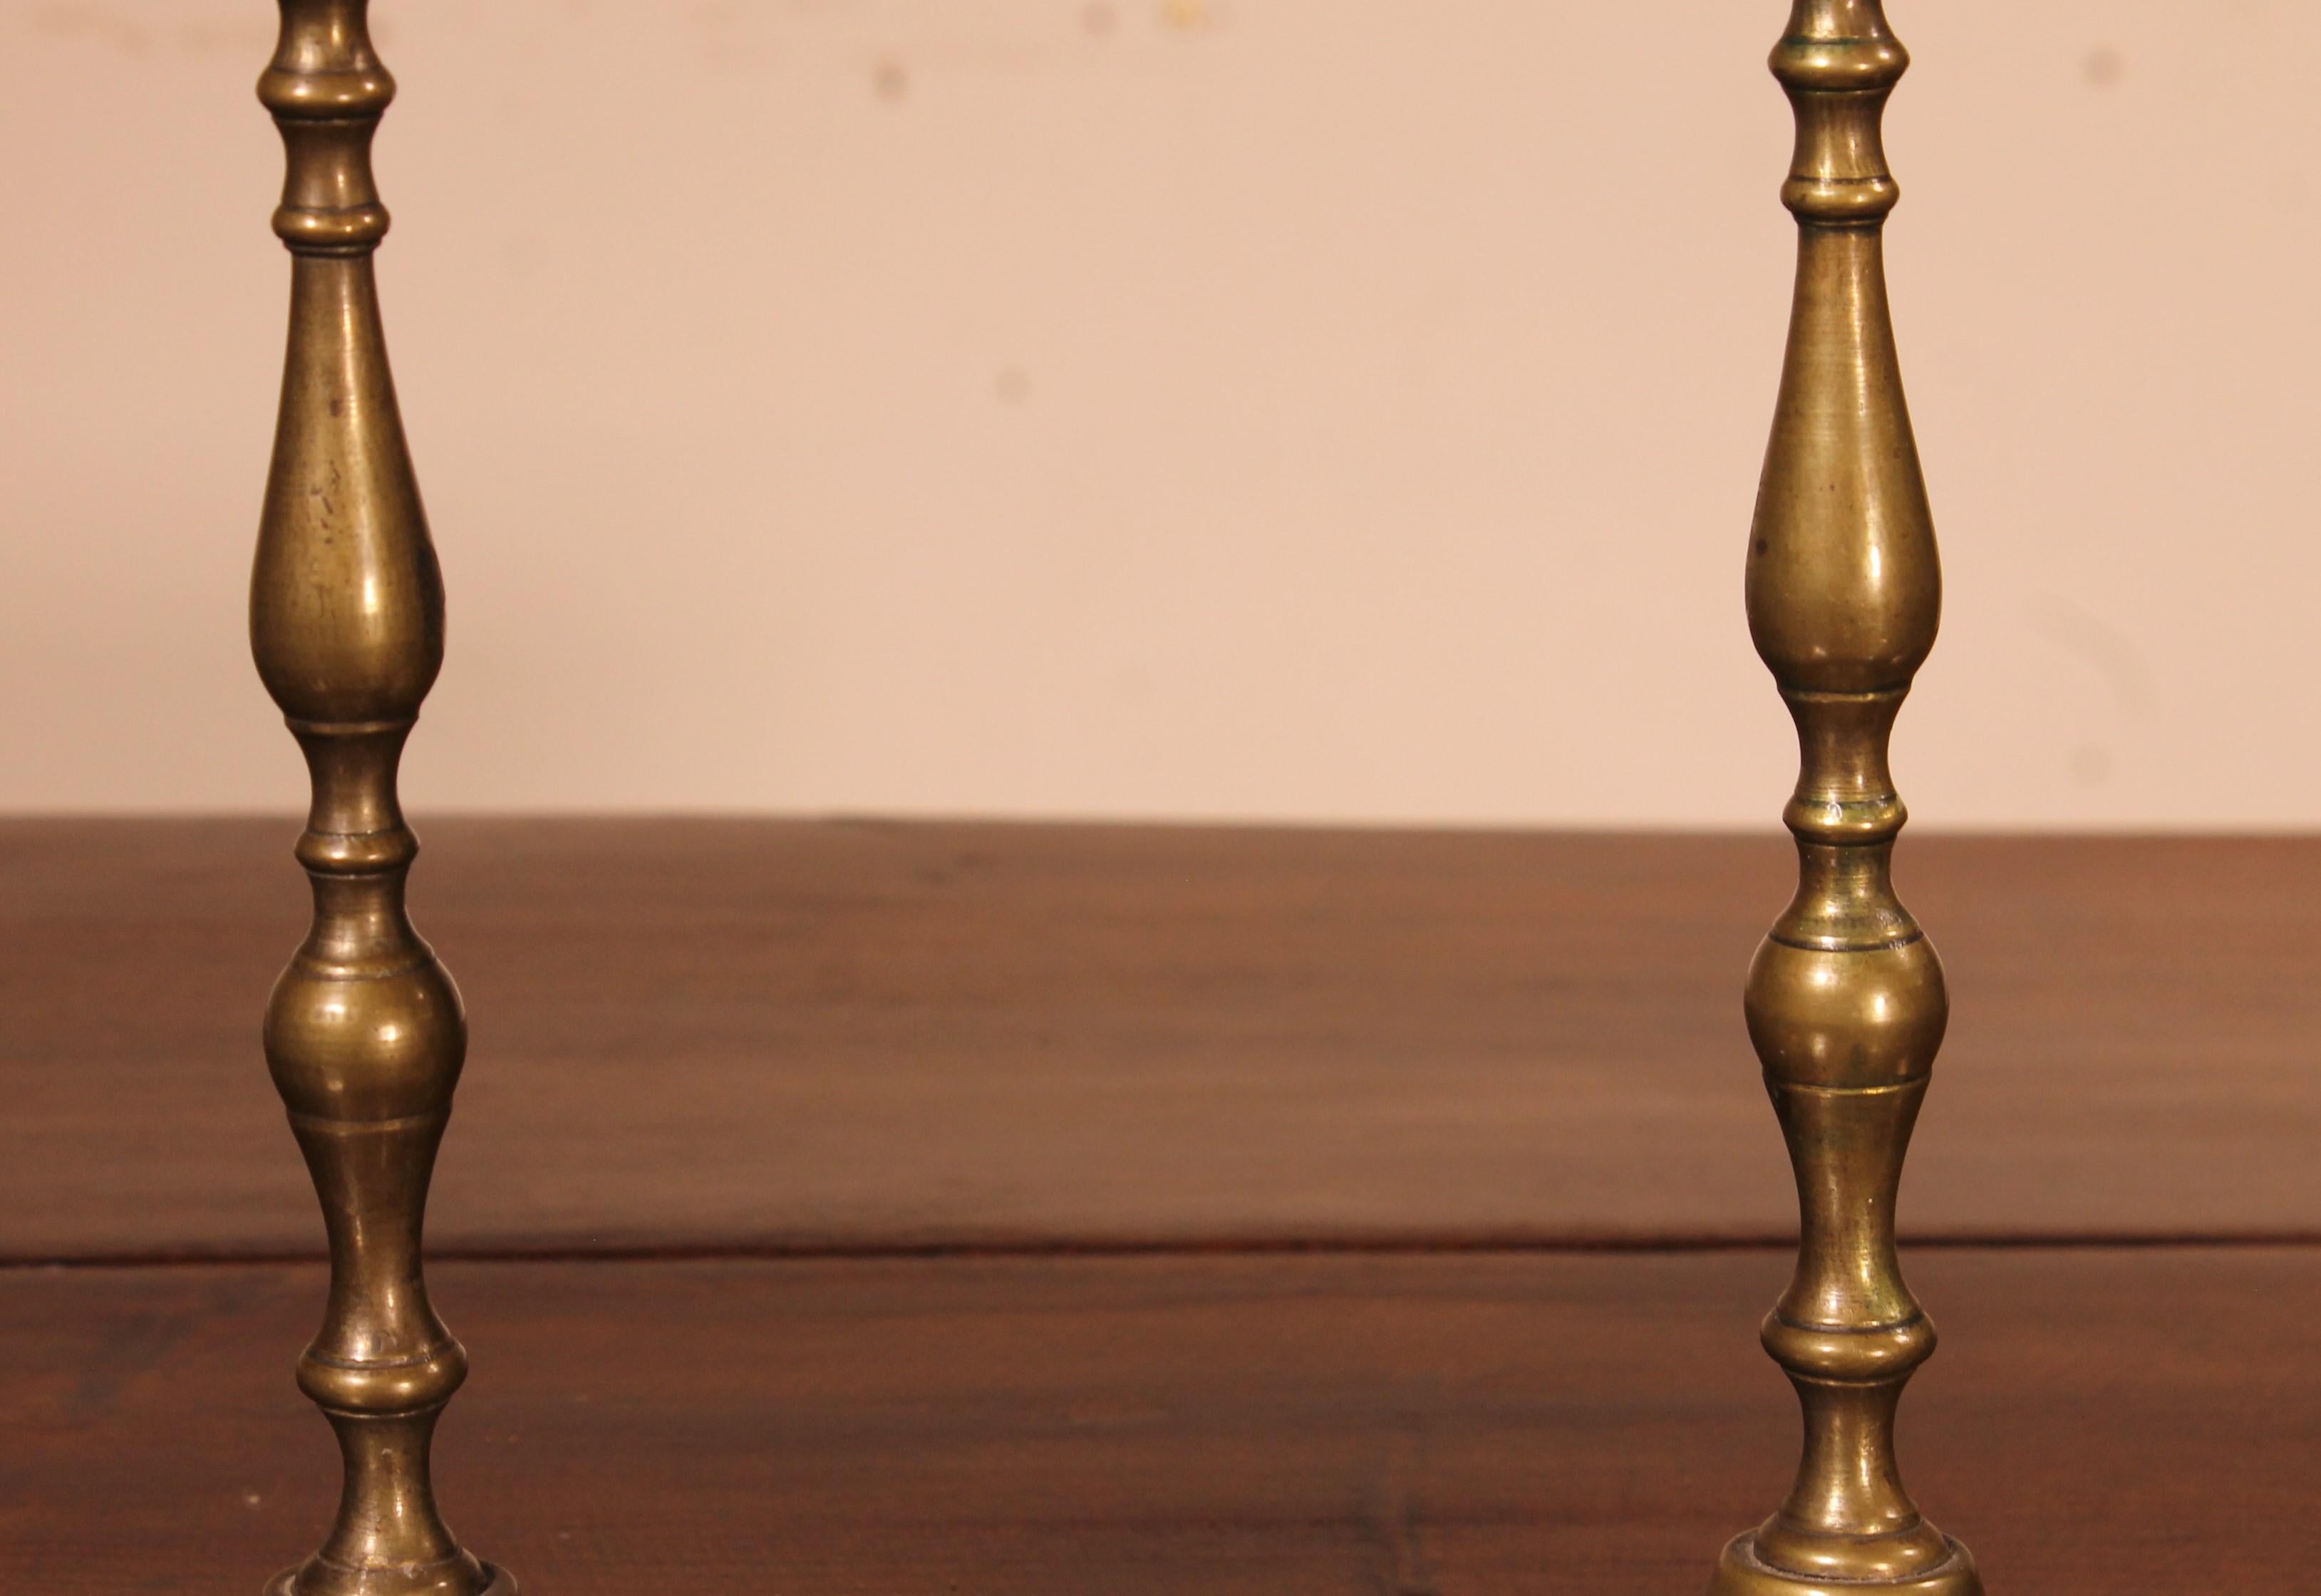 Louis XIV Pair of Small Candlesticks in Bronze, 18th Century For Sale